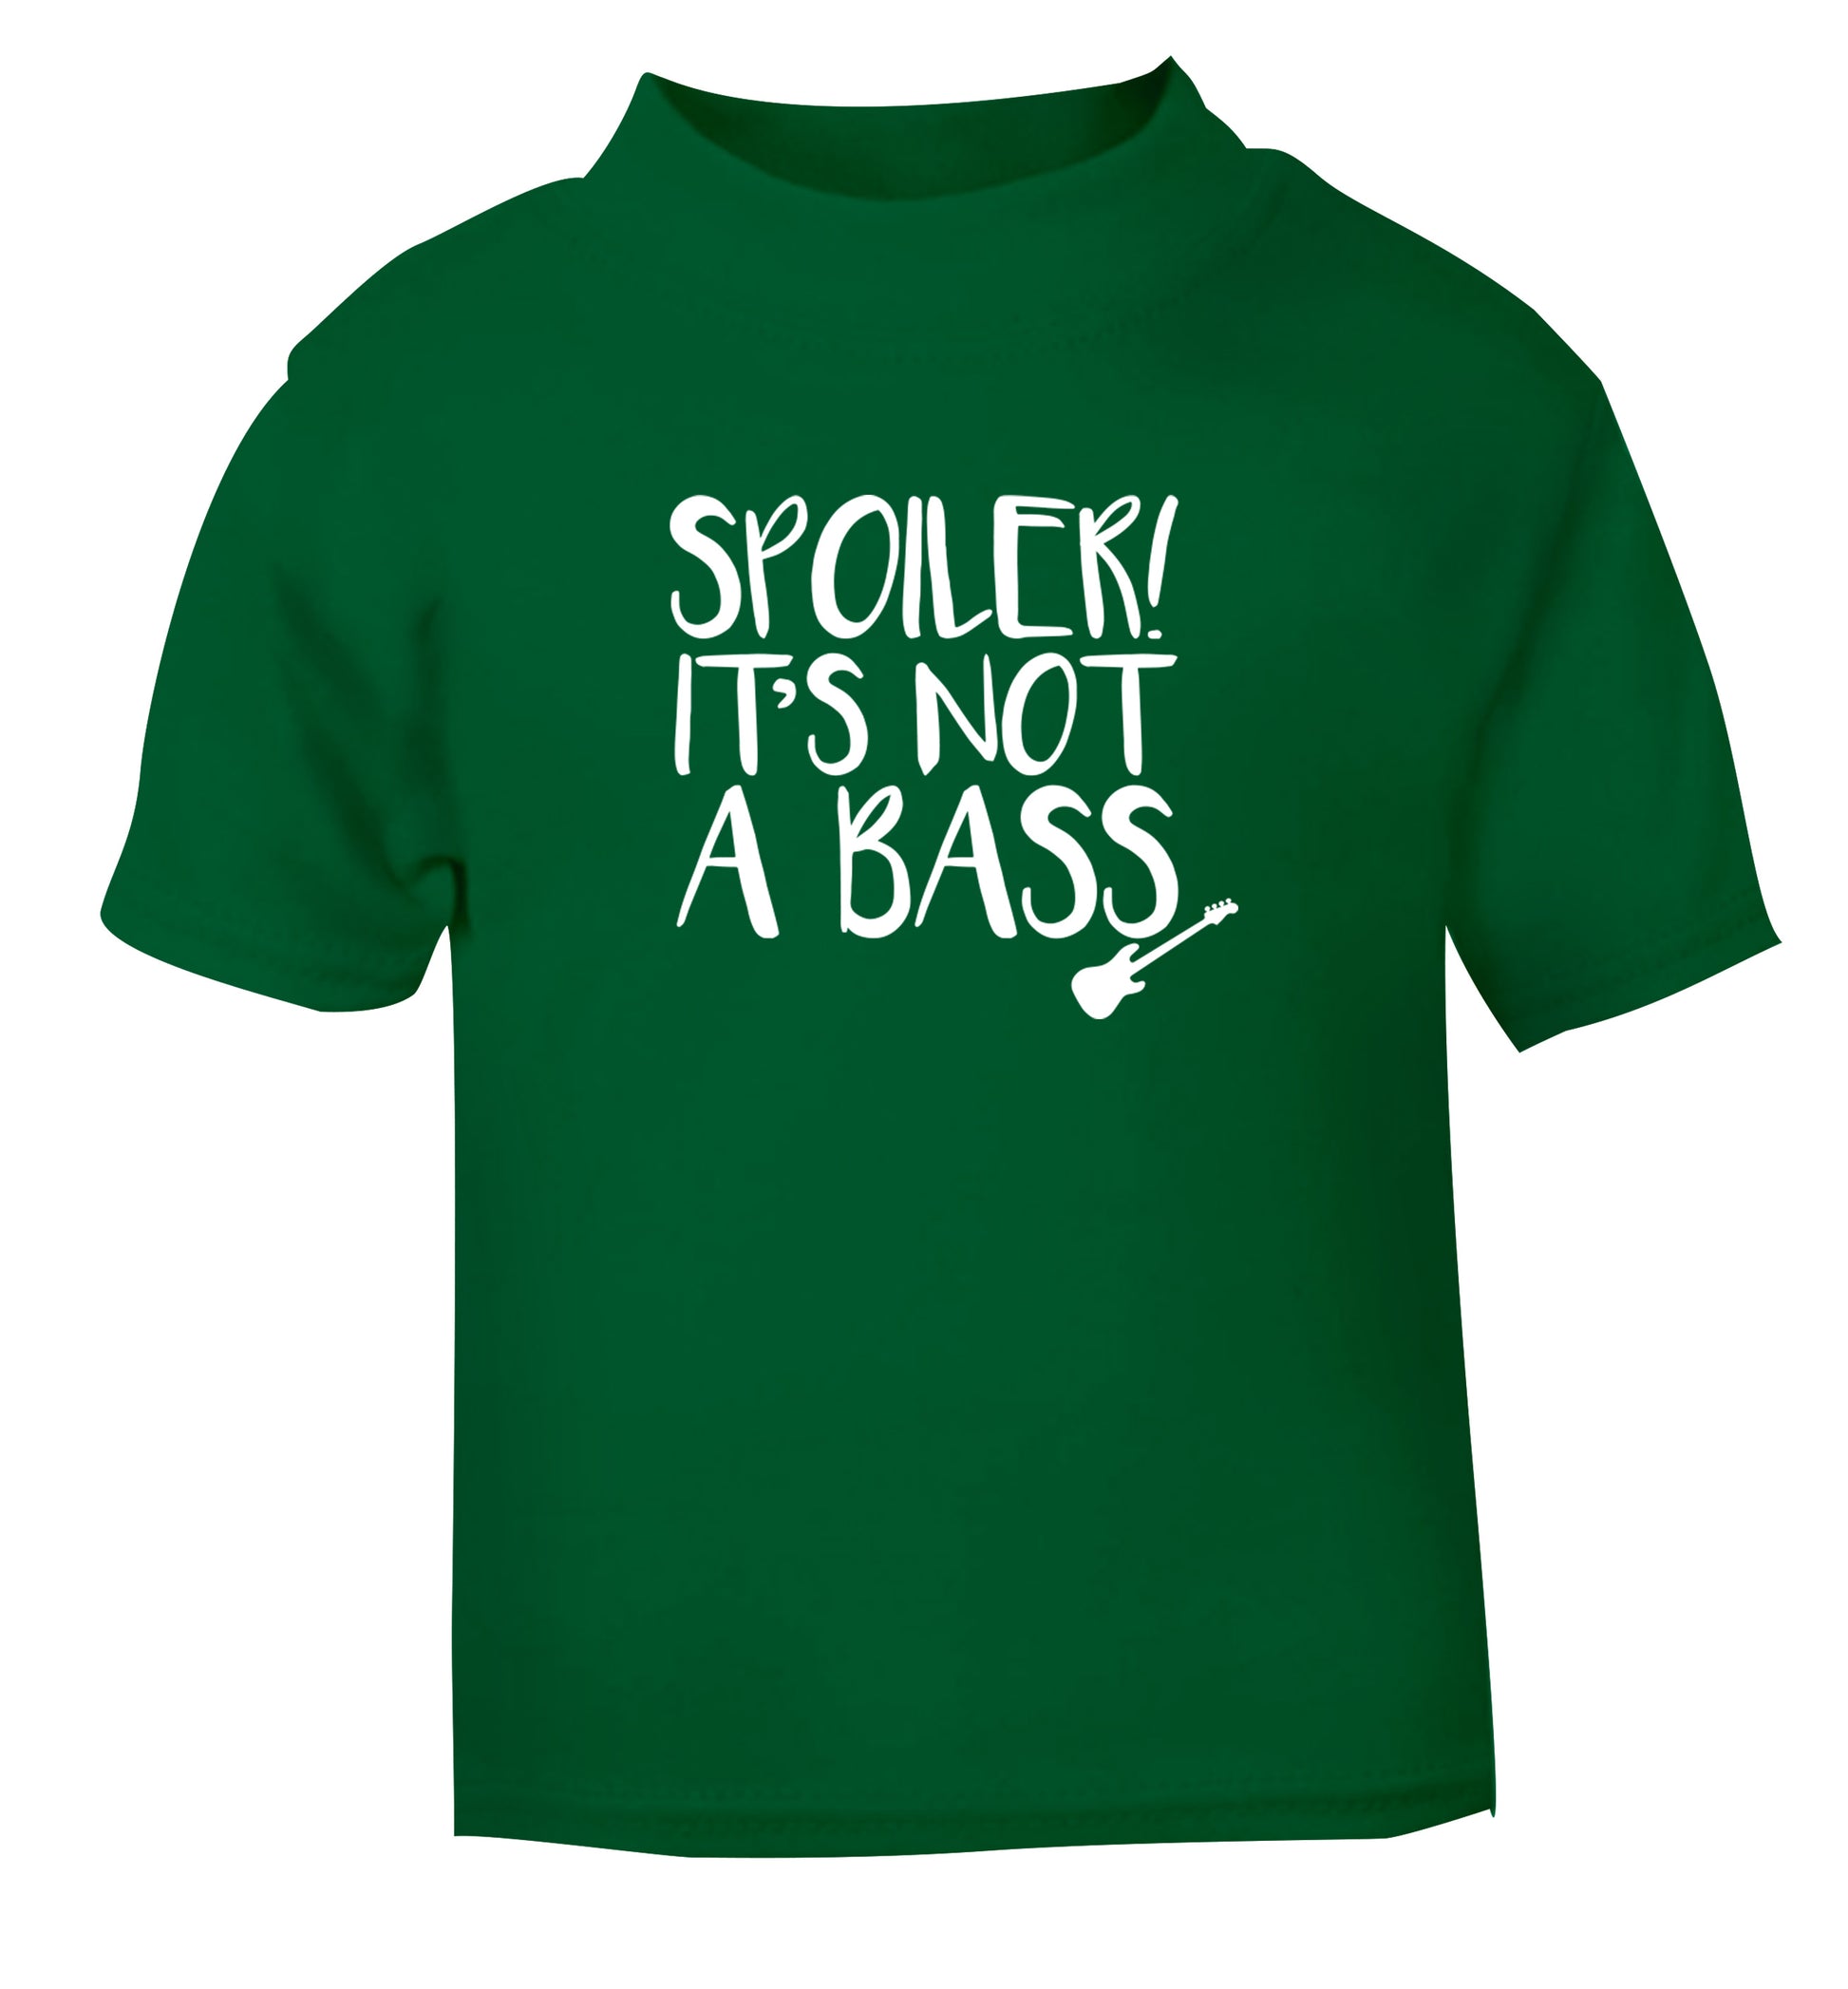 Spoiler it's not a bass green Baby Toddler Tshirt 2 Years